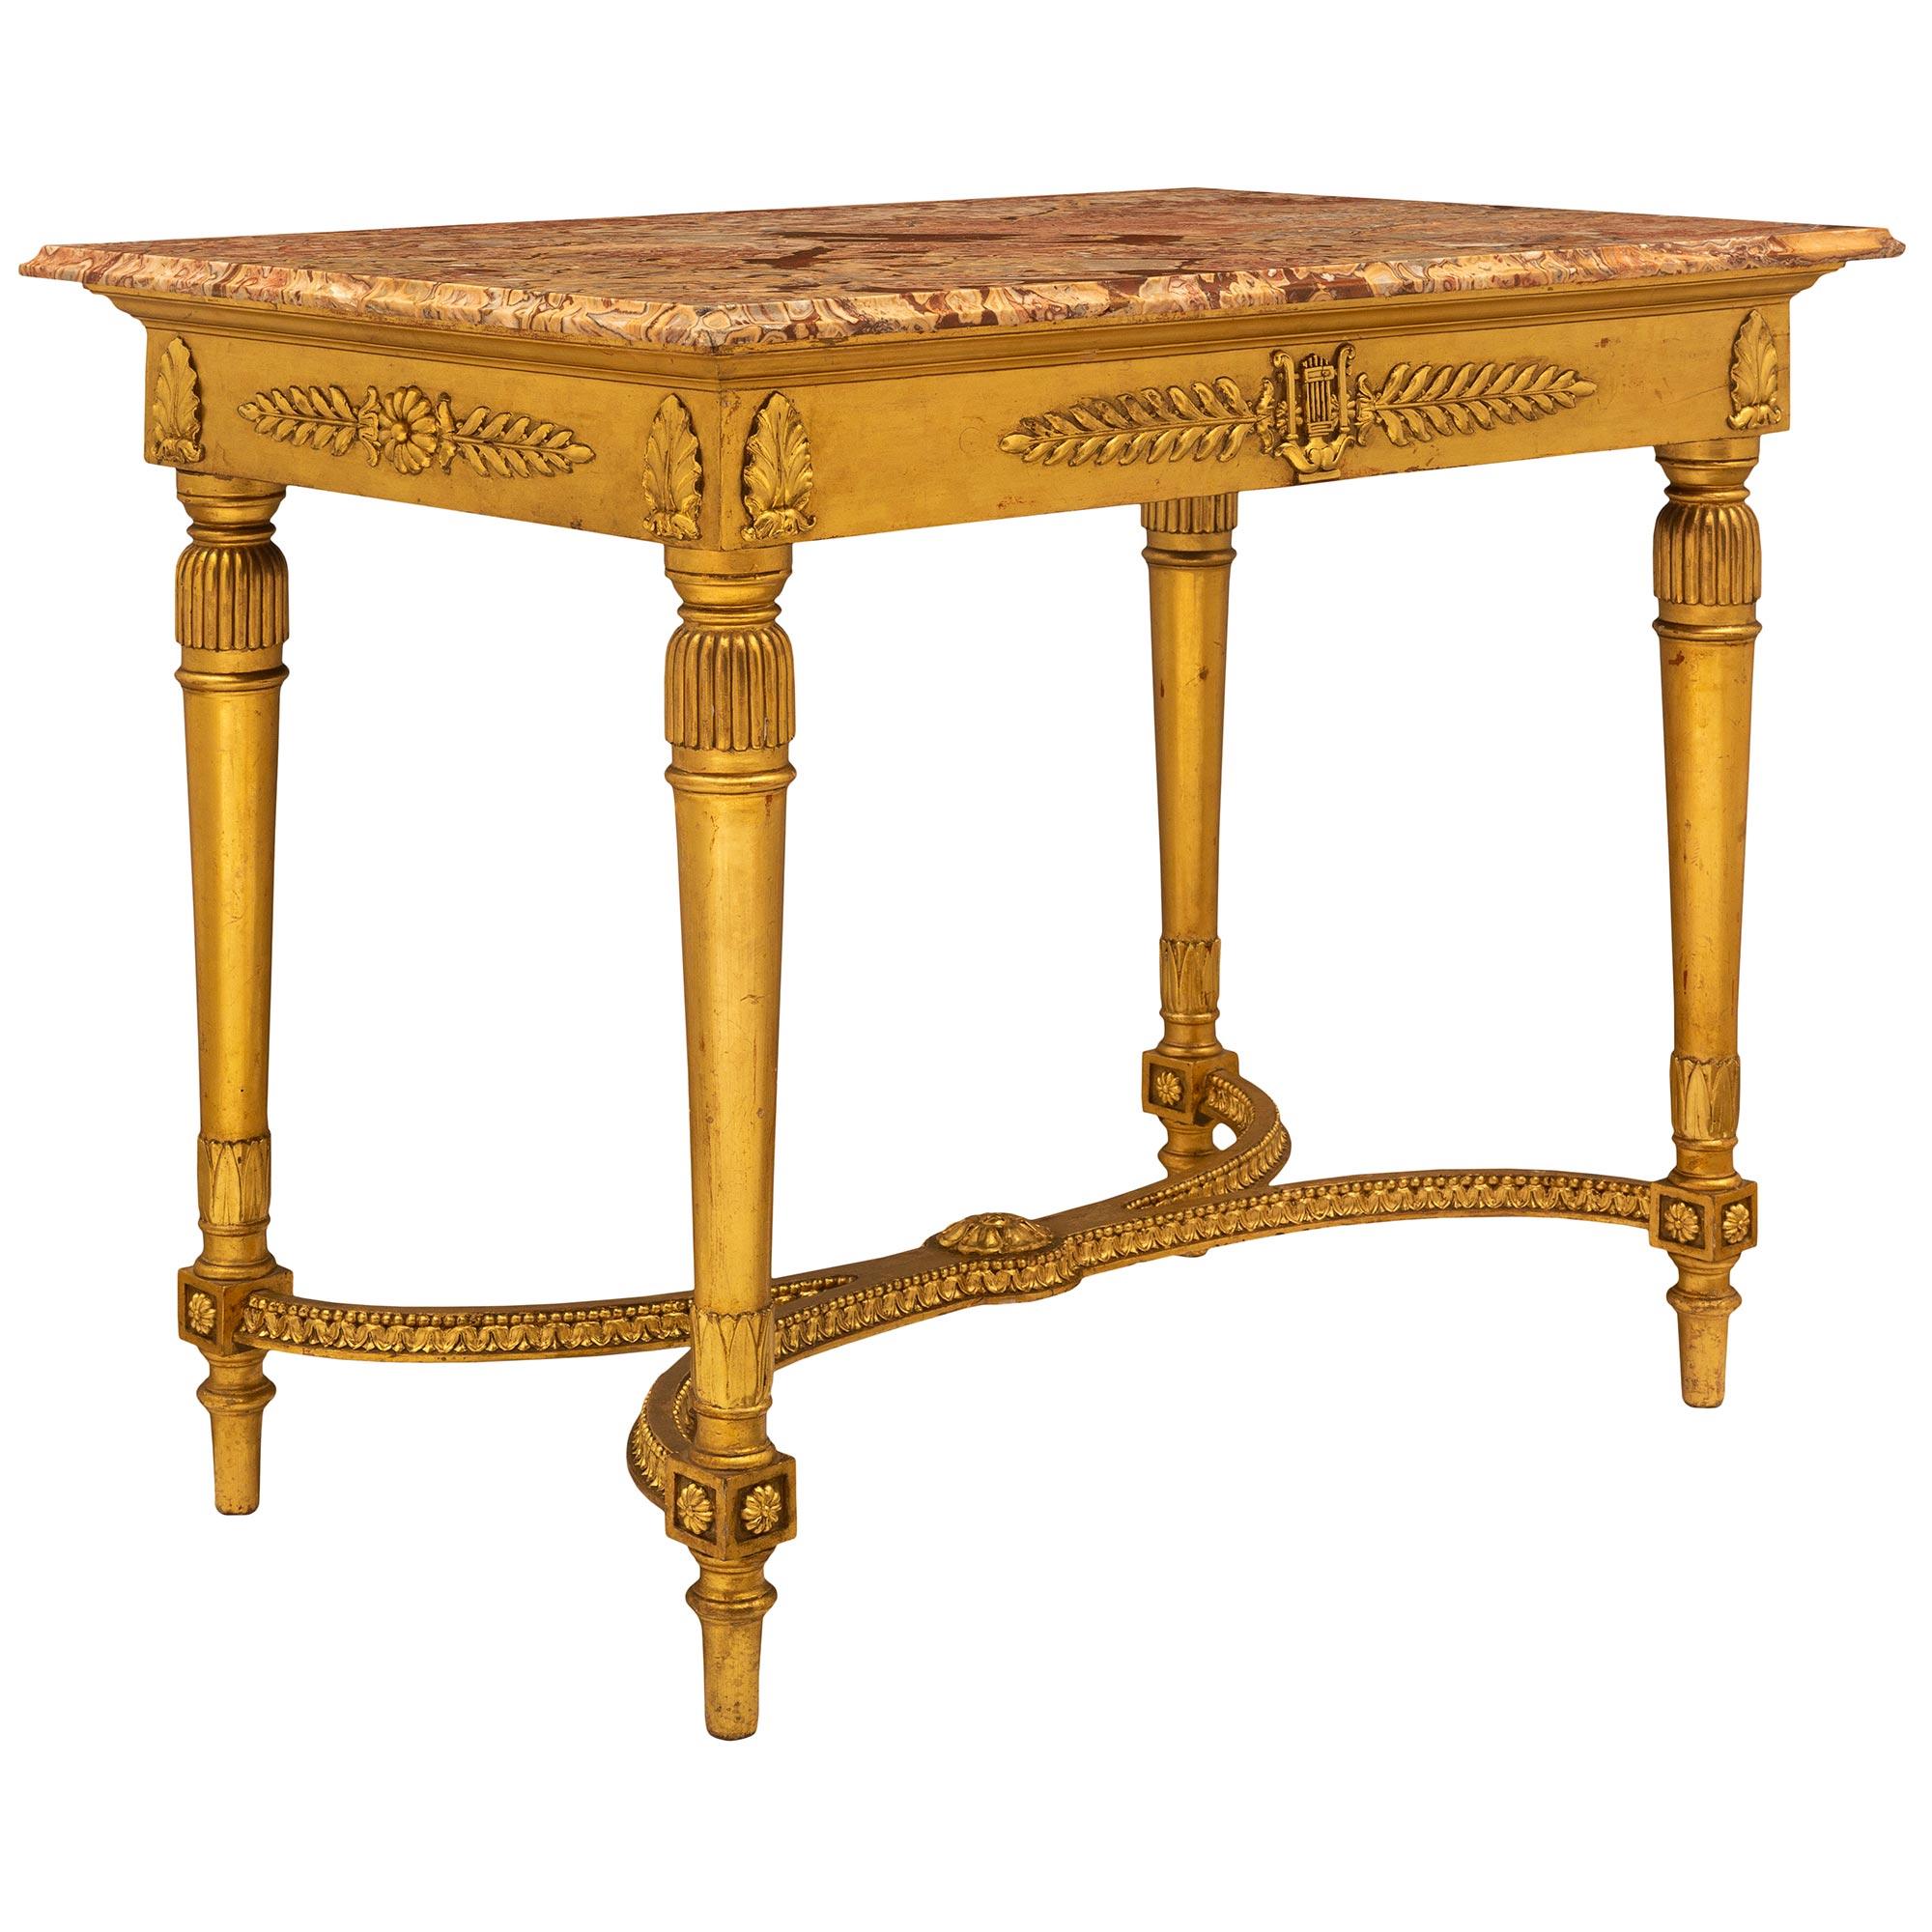 Italian 19th Century Louis XVI Style Rectangular Giltwood Table In Good Condition For Sale In West Palm Beach, FL